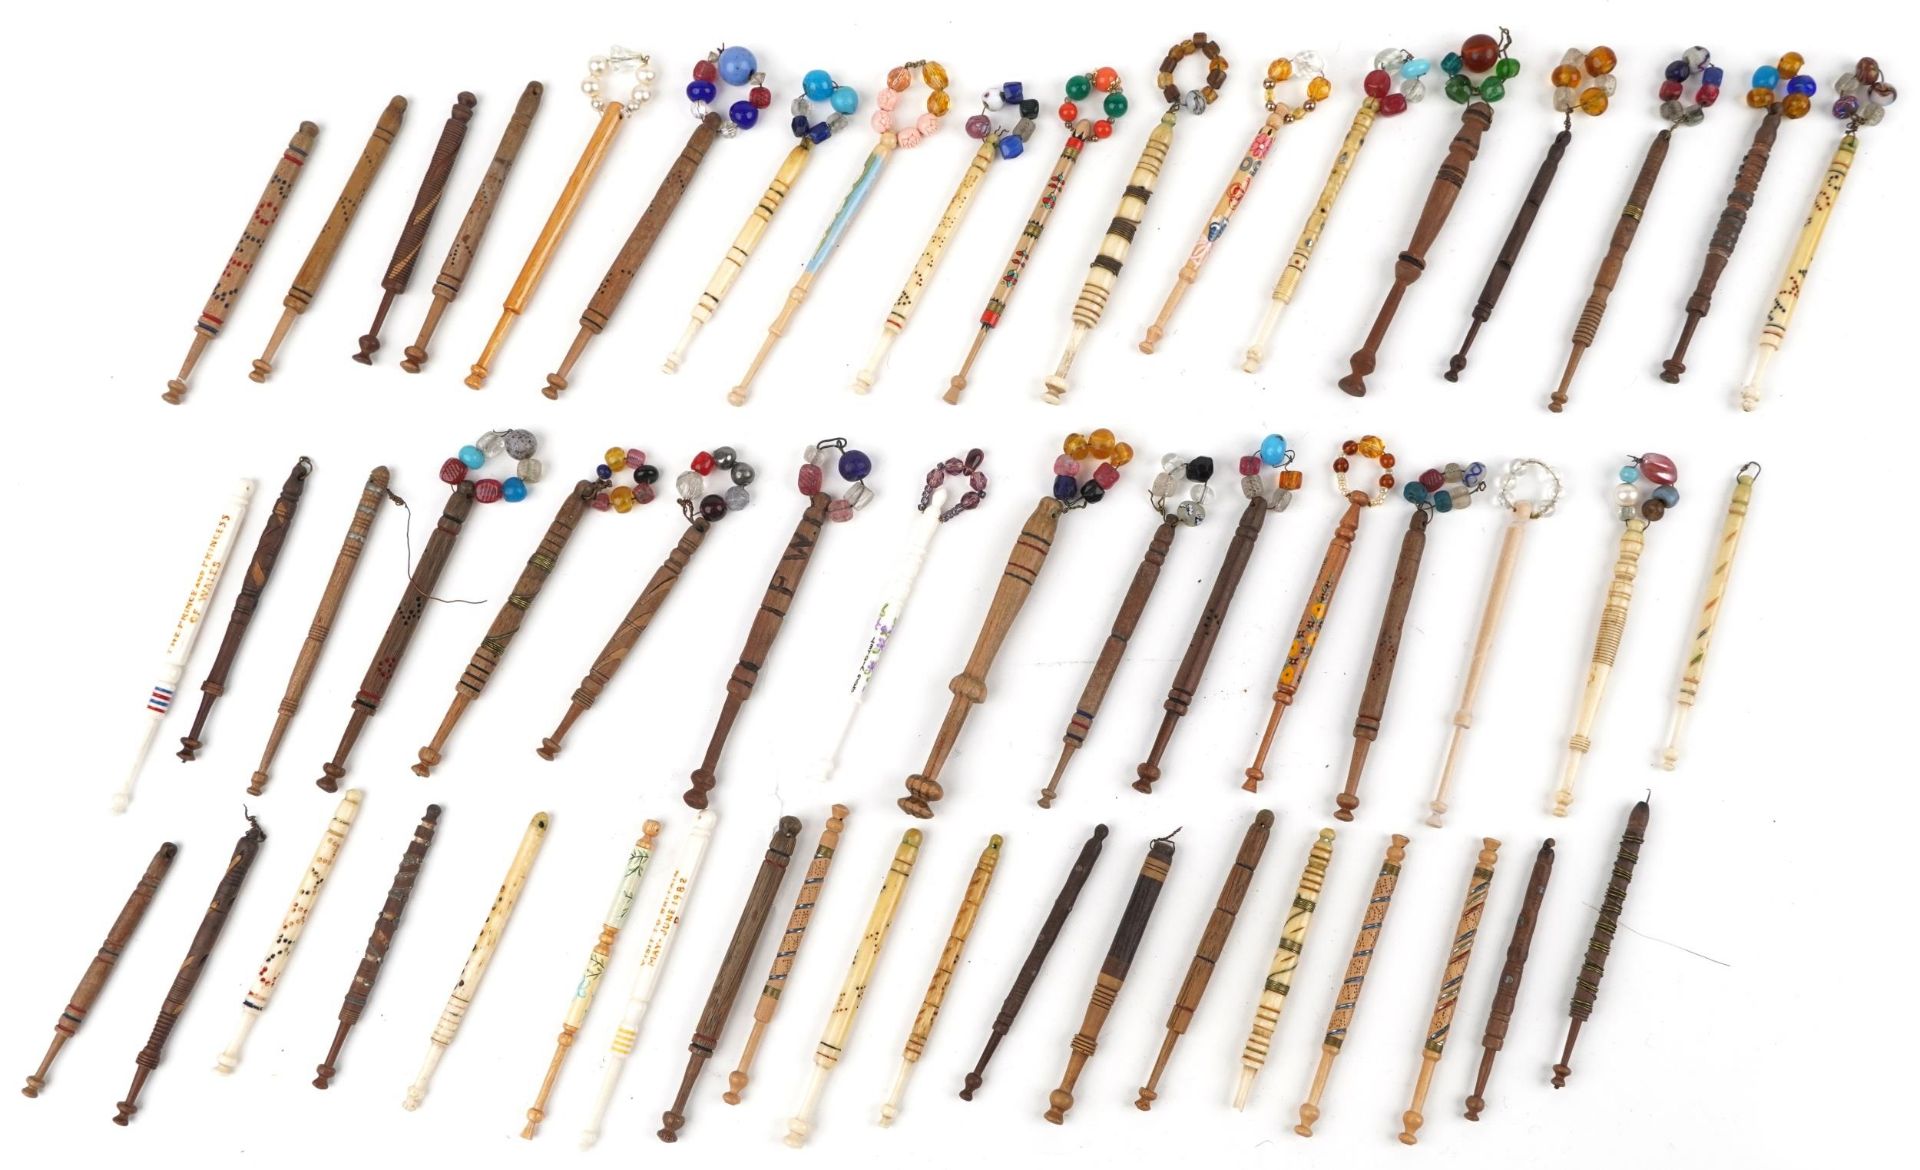 Collection of sewing interest carved bone and hardwood lace making bobbins with beads